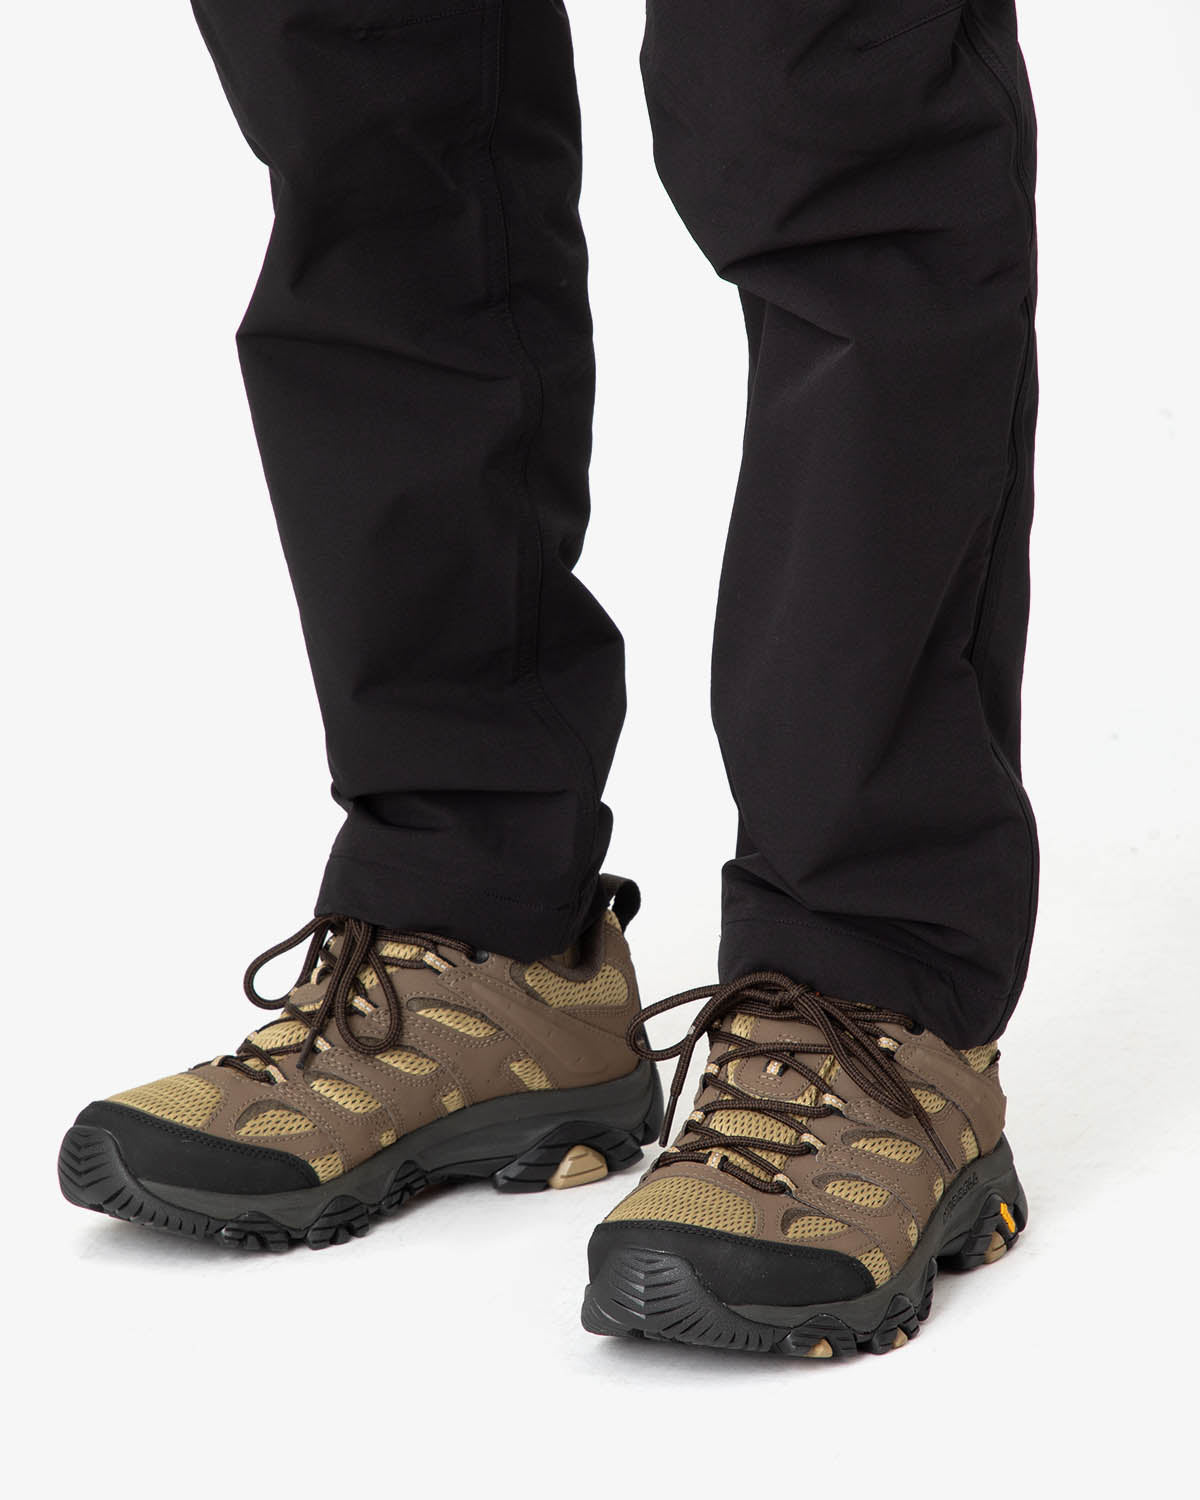 MOAB 3 SYNTHETIC GORE-TEX®